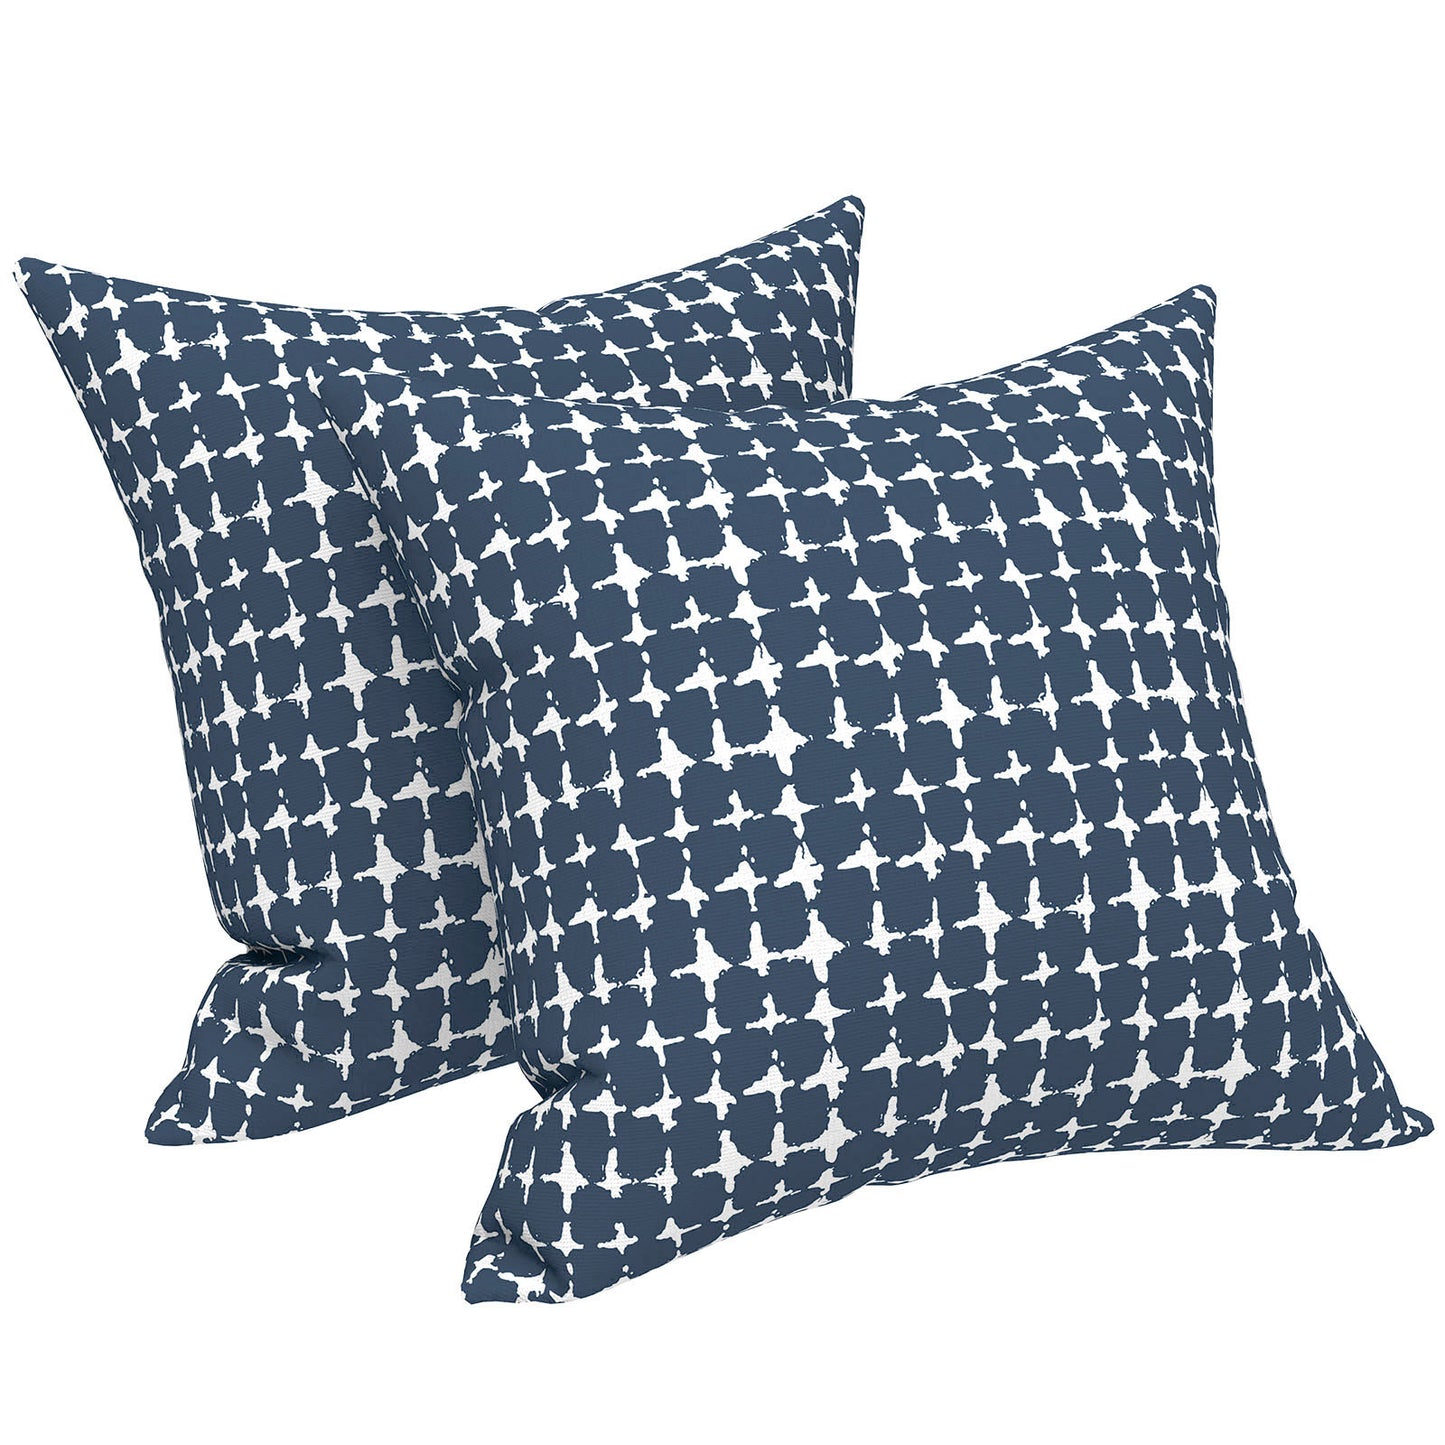 Melody Elephant Patio Throw Pillows with Inners, Fade Resistant Square Pillow Pack of 2, Decorative Garden Cushions for Home, 18x18 Inch, Tie-Dye Navy